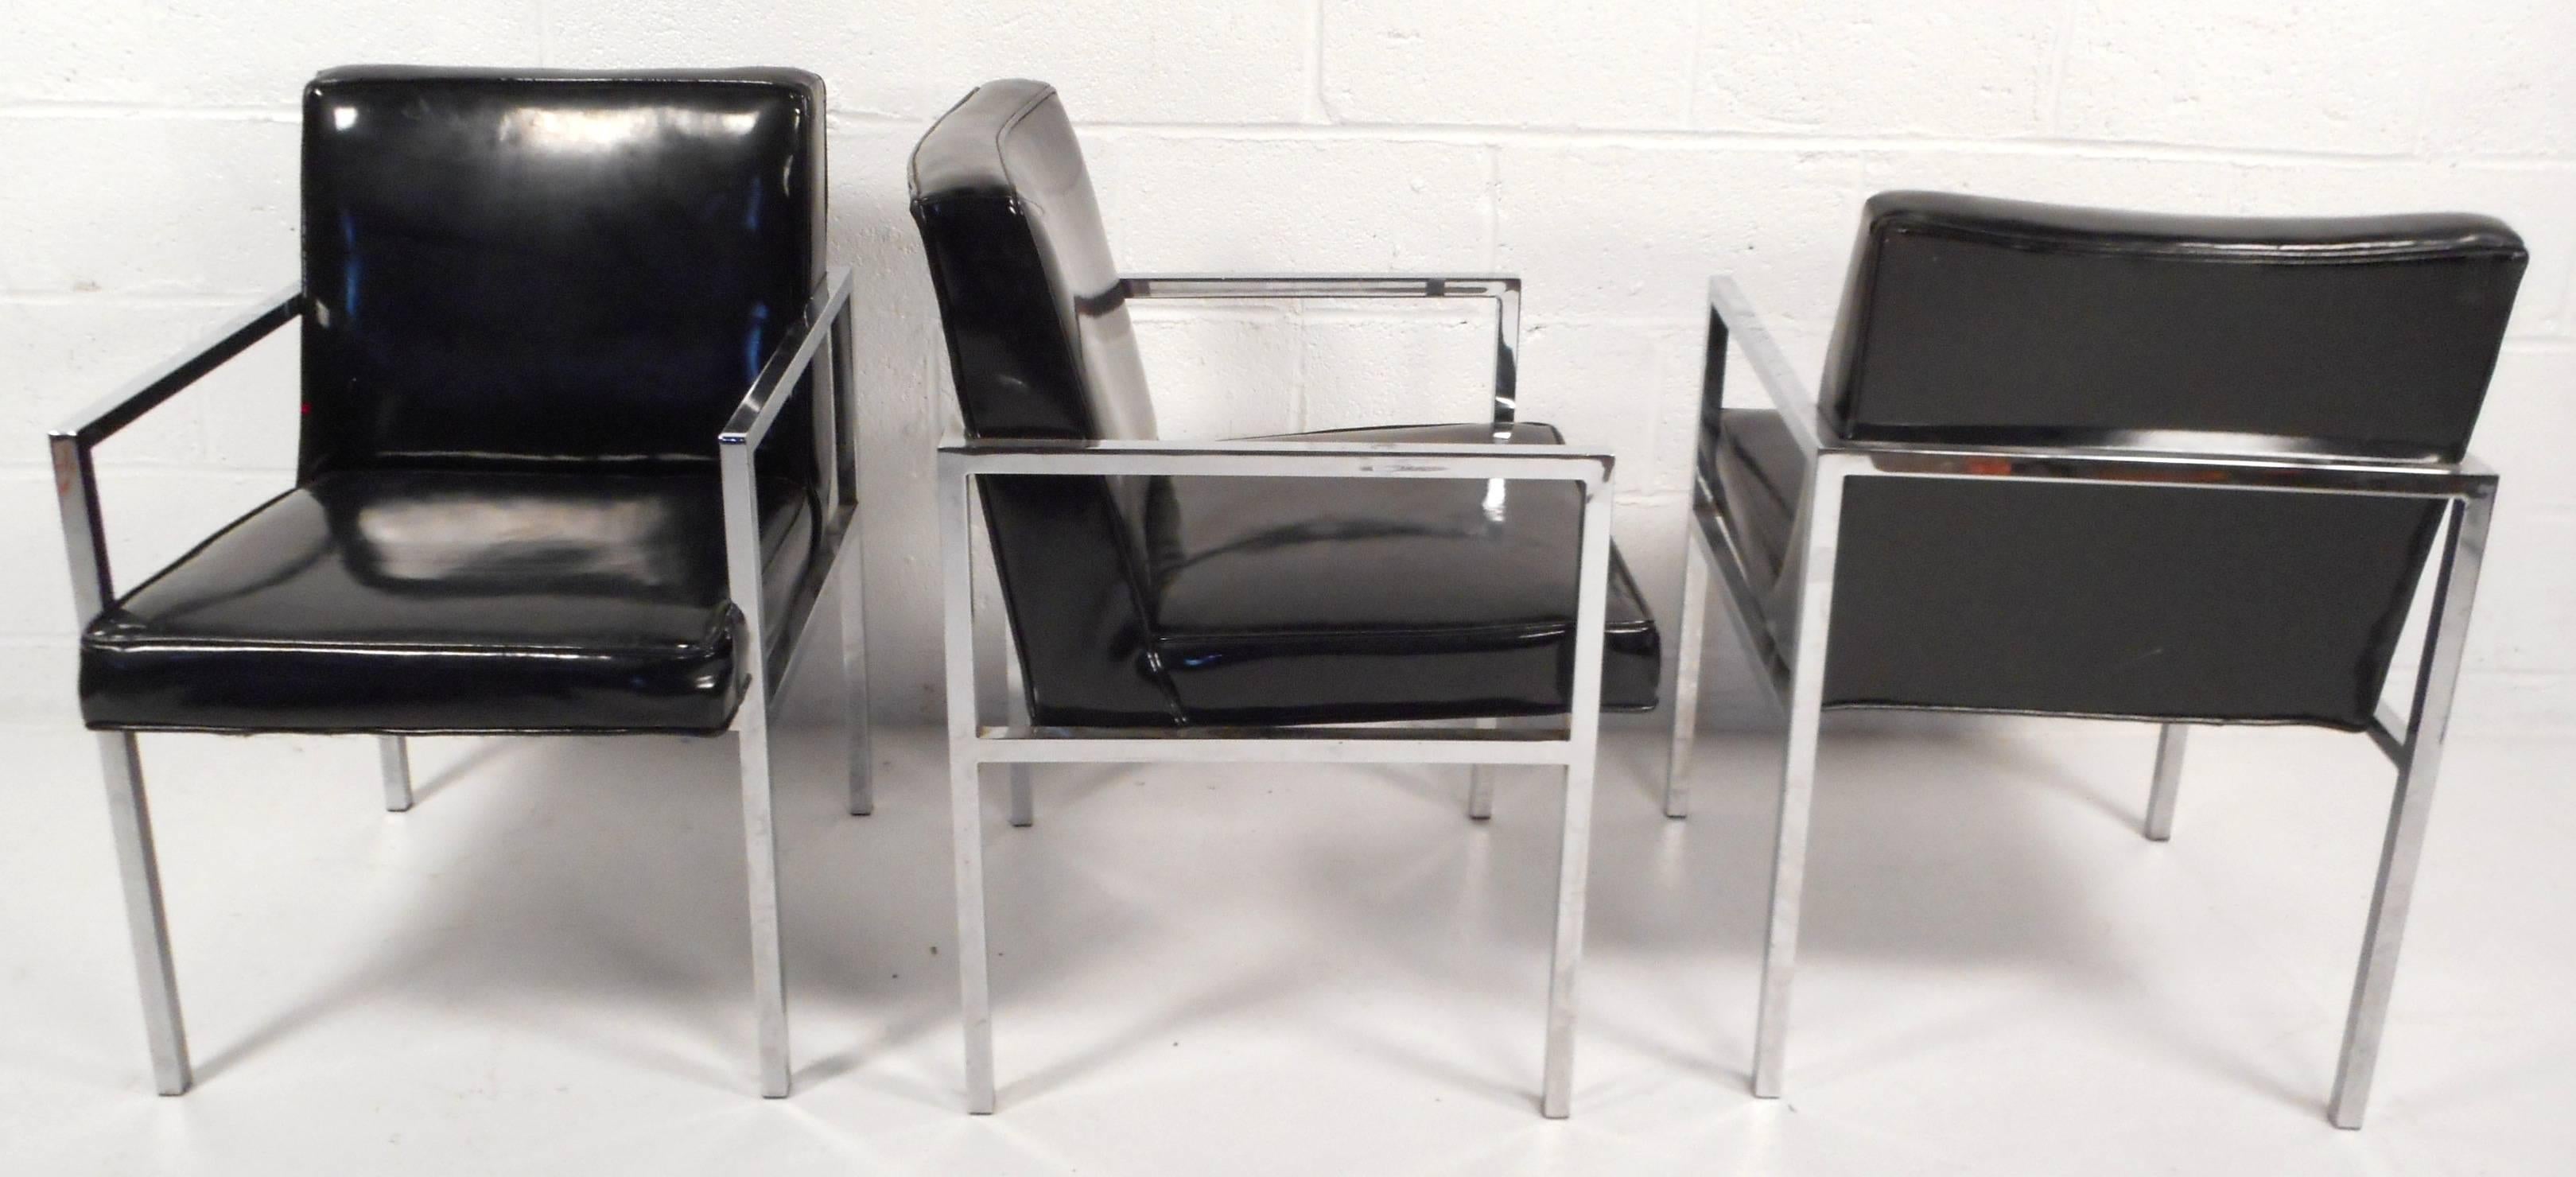 Beautiful set of four Mid-Century Modern dining chairs feature black vinyl and a heavy chrome frame. Sleek design with thick cushions and wide seating ensures comfort and style in any modern interior. Please confirm item location (NY or NJ).